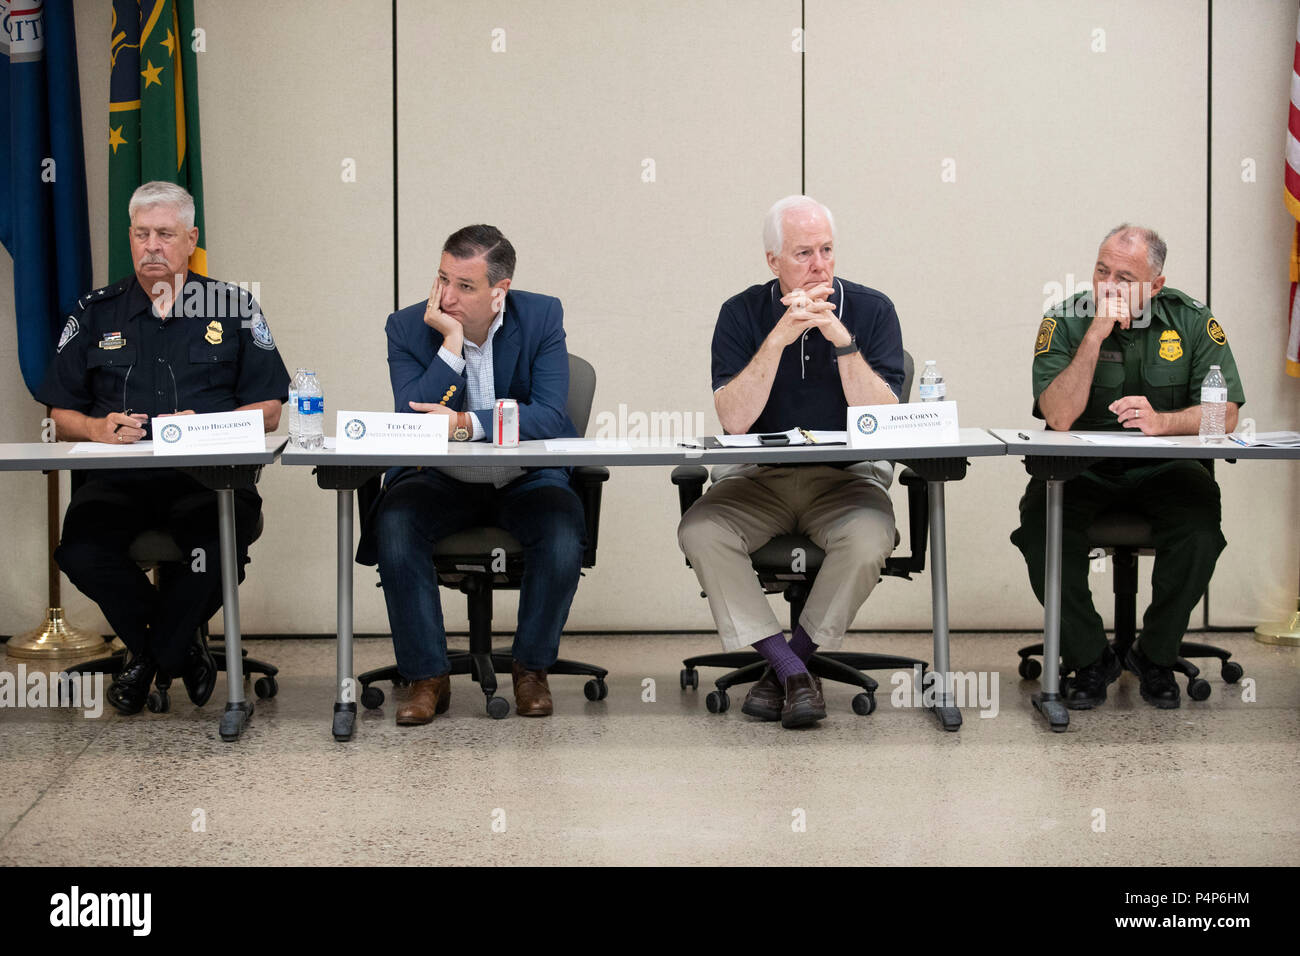 U.S. Senators Ted Cruz and John Cornyn listen as federal and Texas officials and stakeholders meet in a round-table discussion of the immigration crisis hitting the Texas-Mexico border. Confusion and public outrage reigned regarding the Trump administration's policy of separating undocumented immigrant parents from their children after crossing into the U.S. from Mexico. Stock Photo